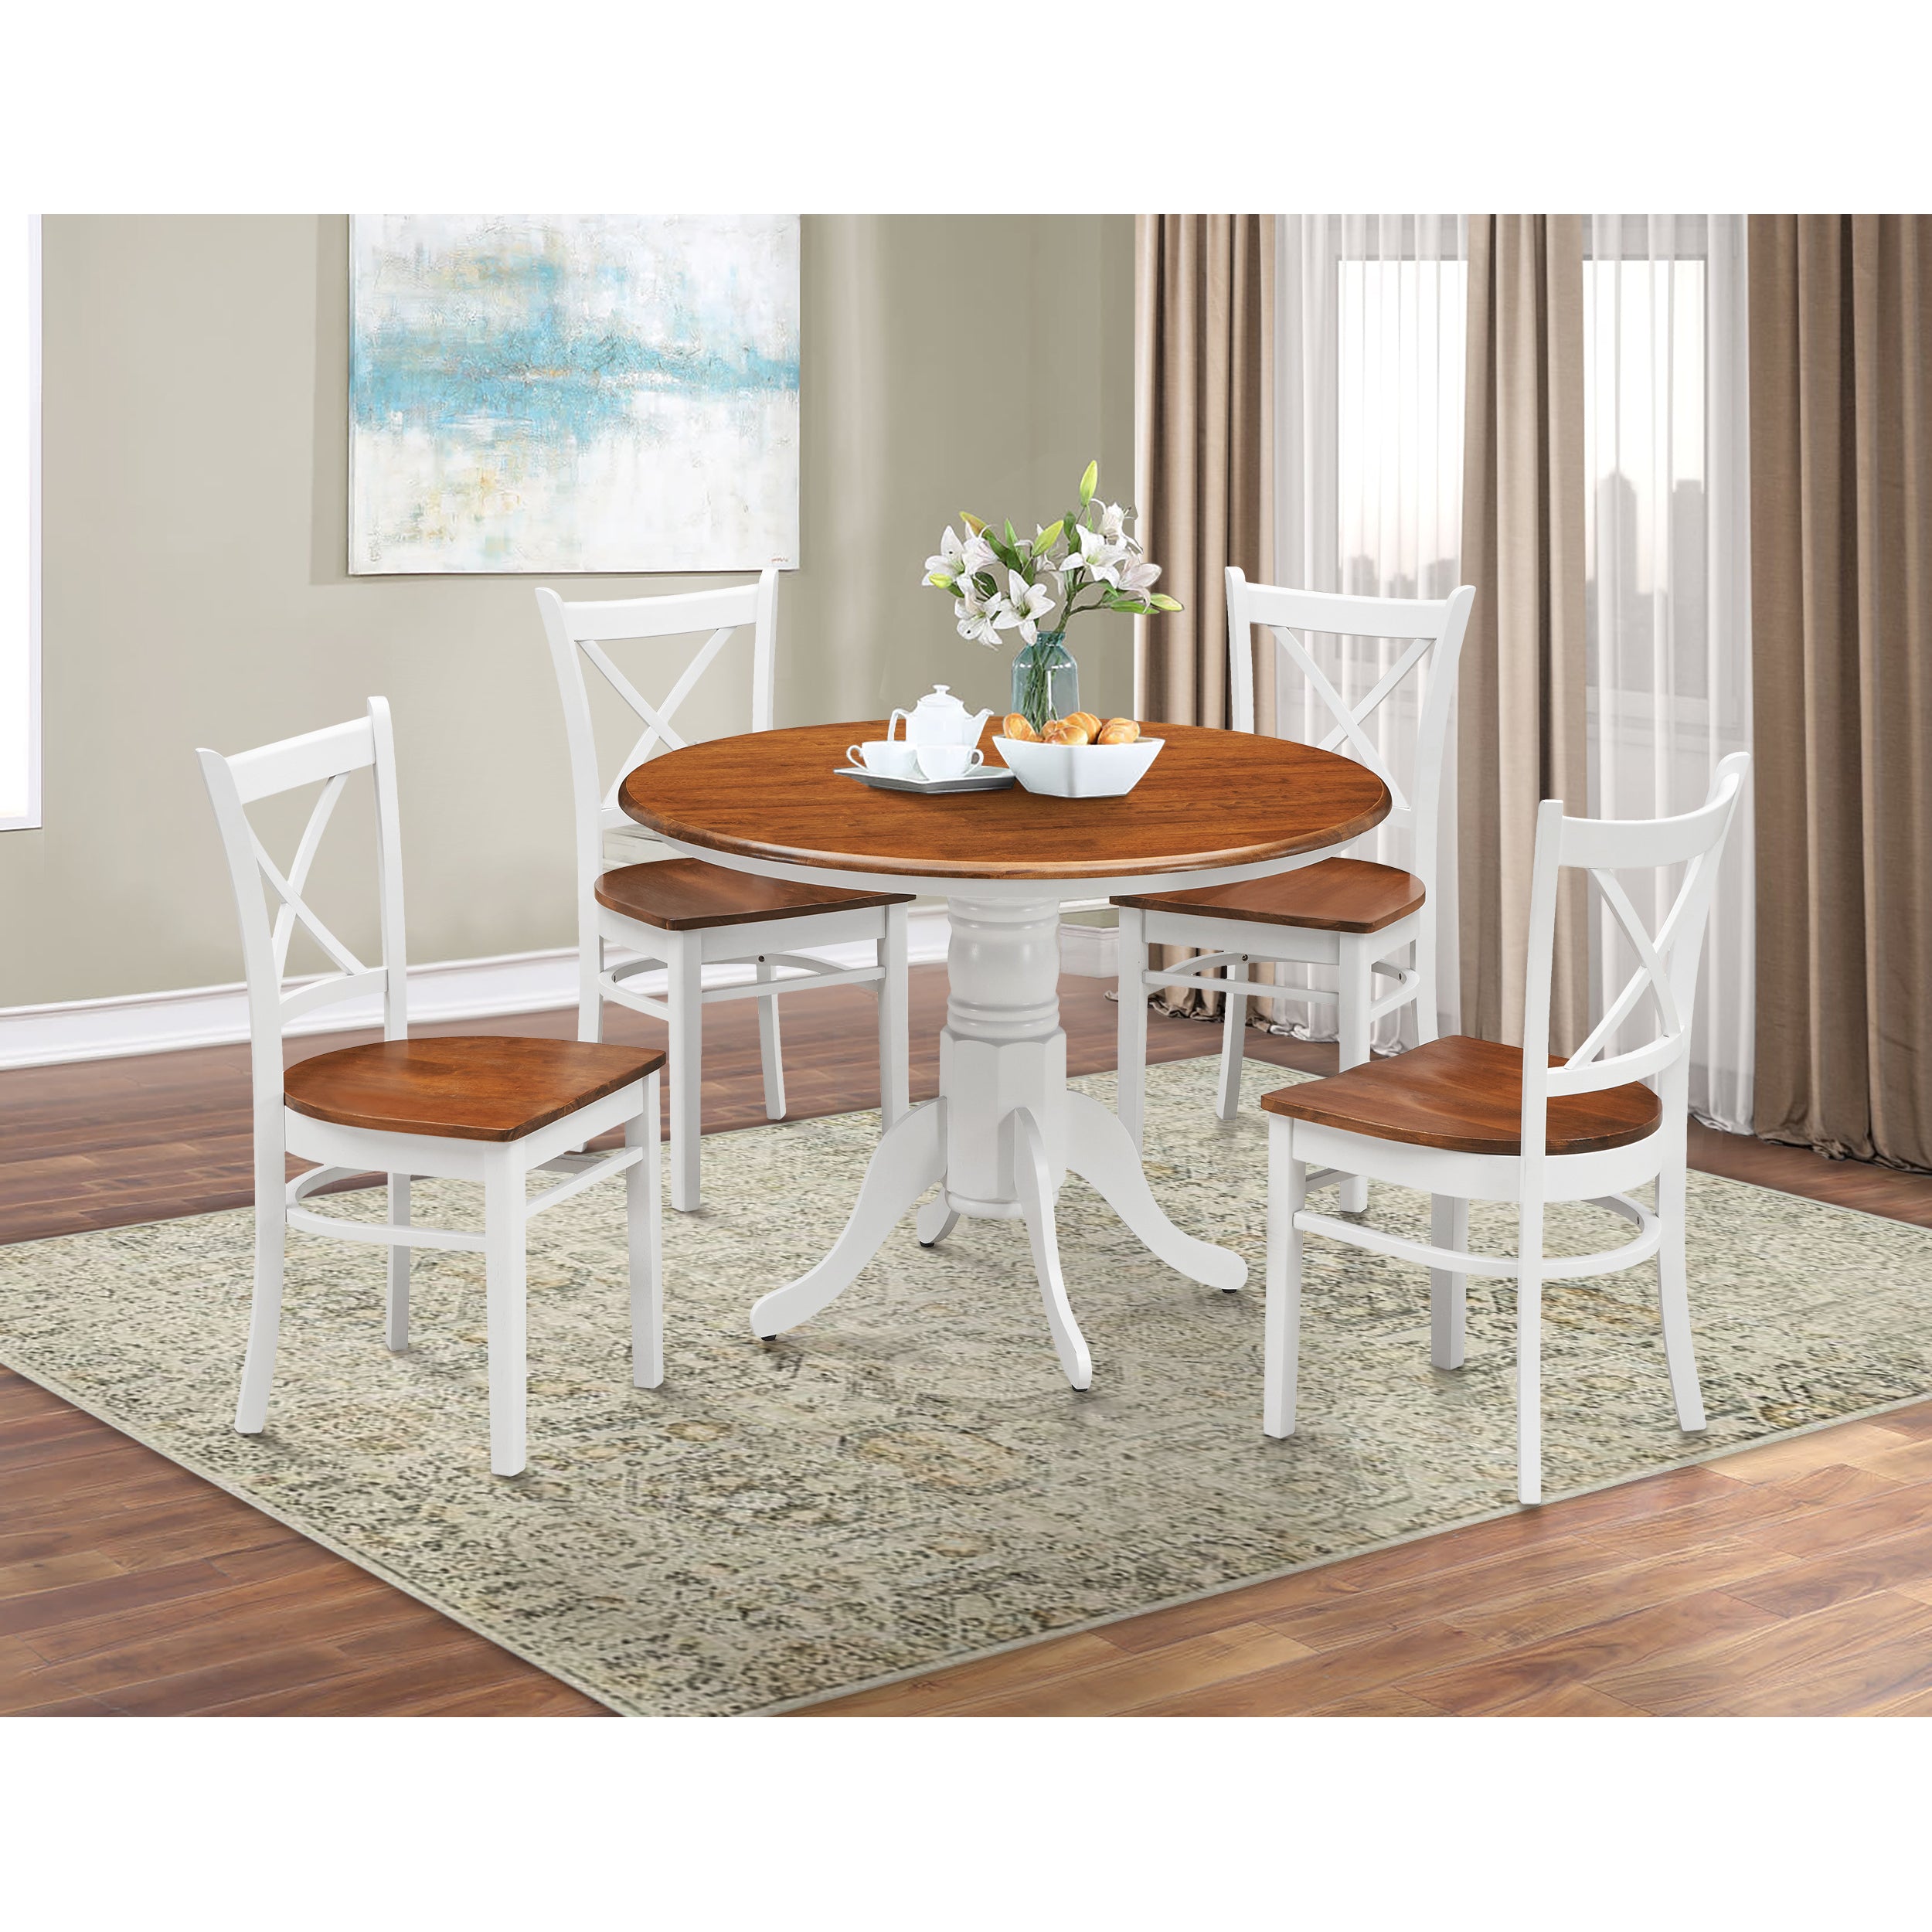 6 pcs Classic Crossback Dining Chair Set - Solid Rubber Wood - White Oak Finish